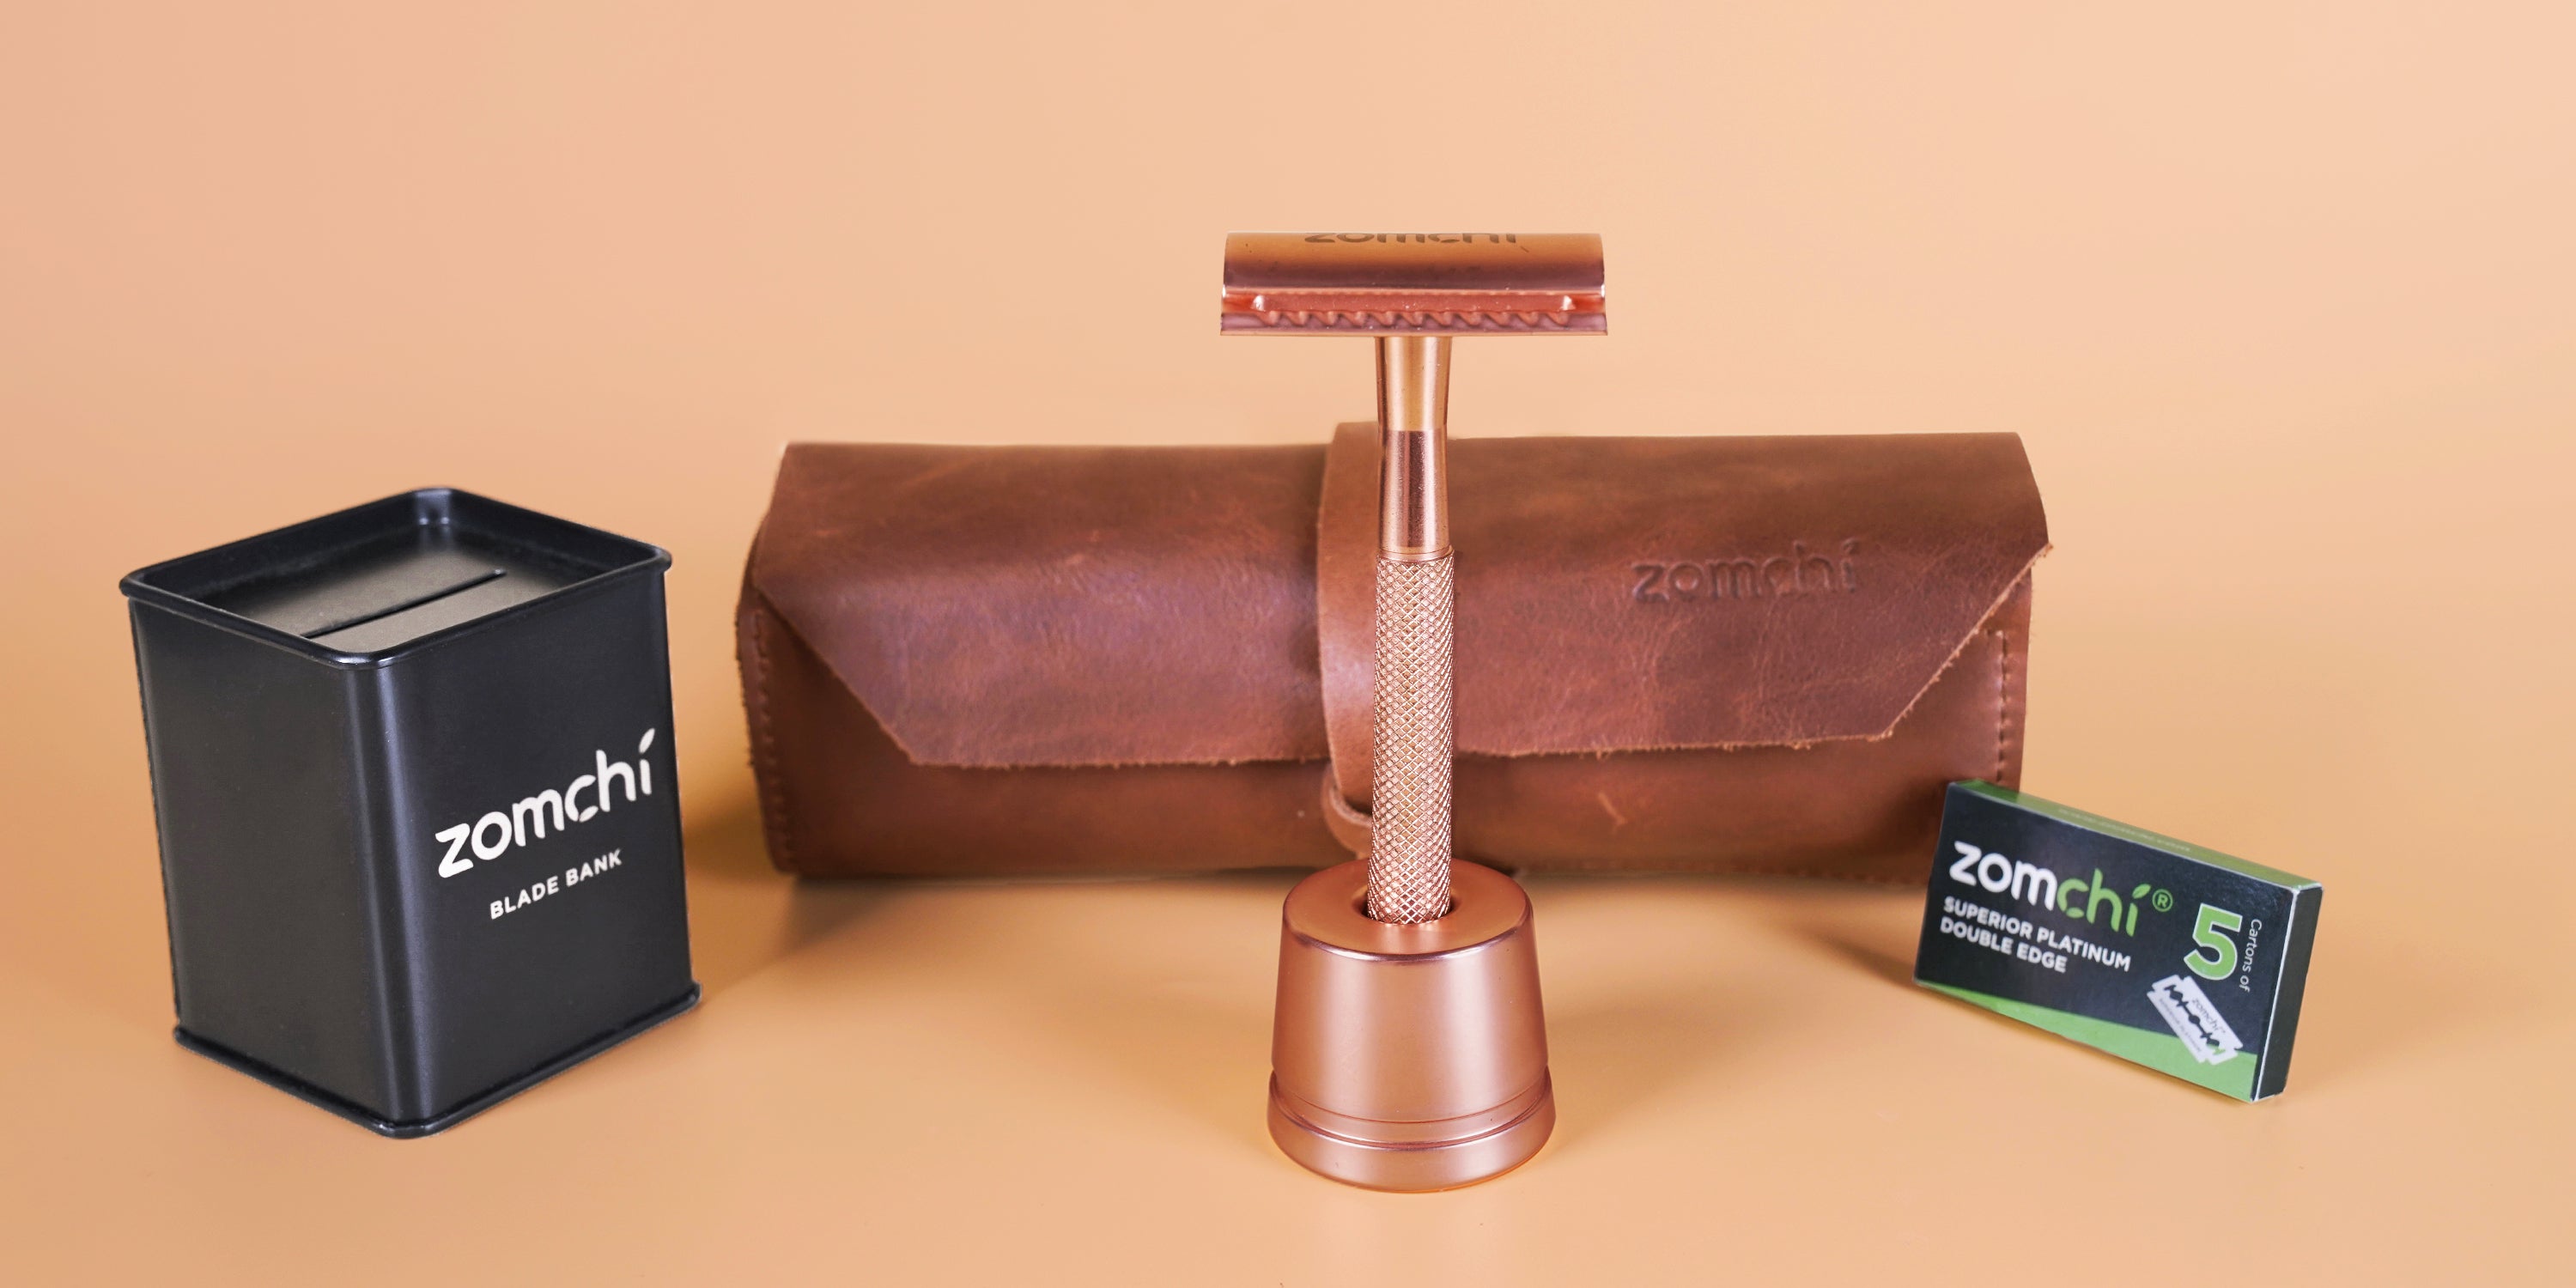 How to Conveniently Travel with a Safety Razor